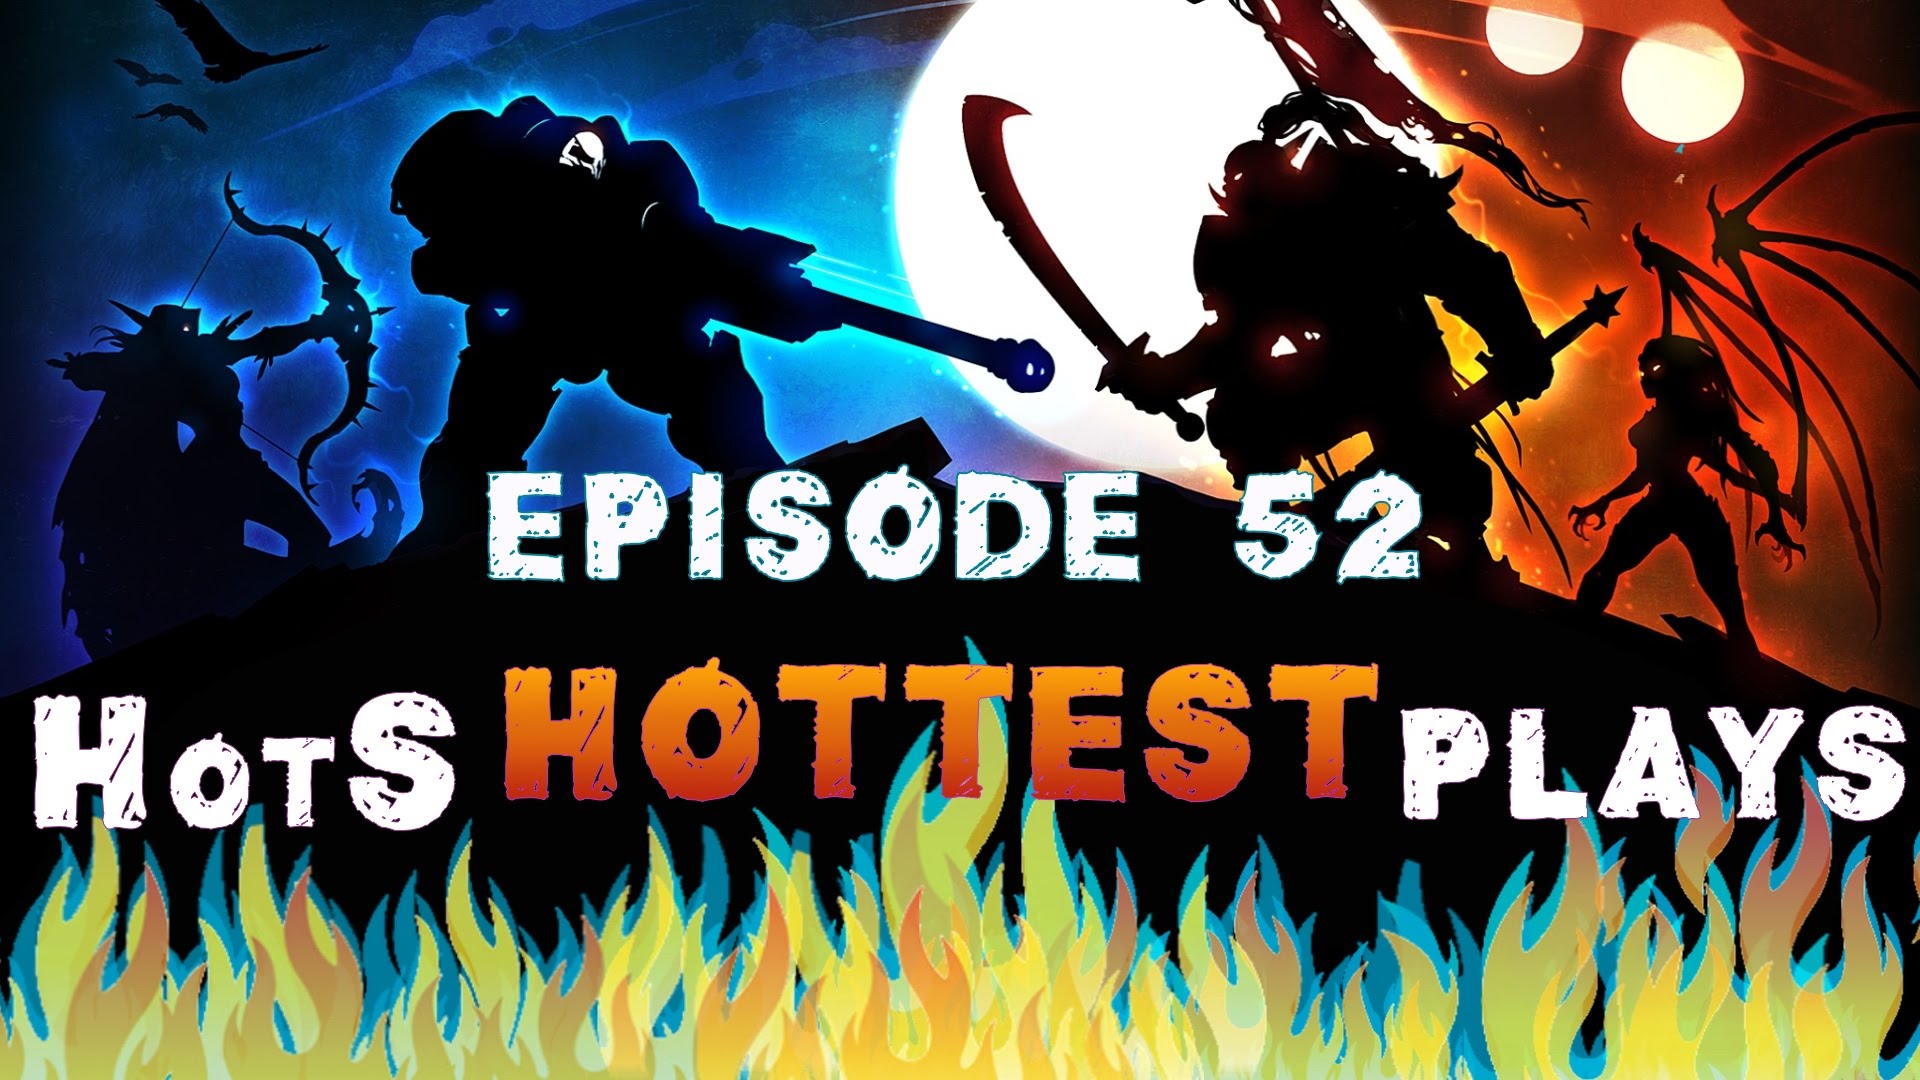 Top 5 Hottest Plays: nuova puntata online!